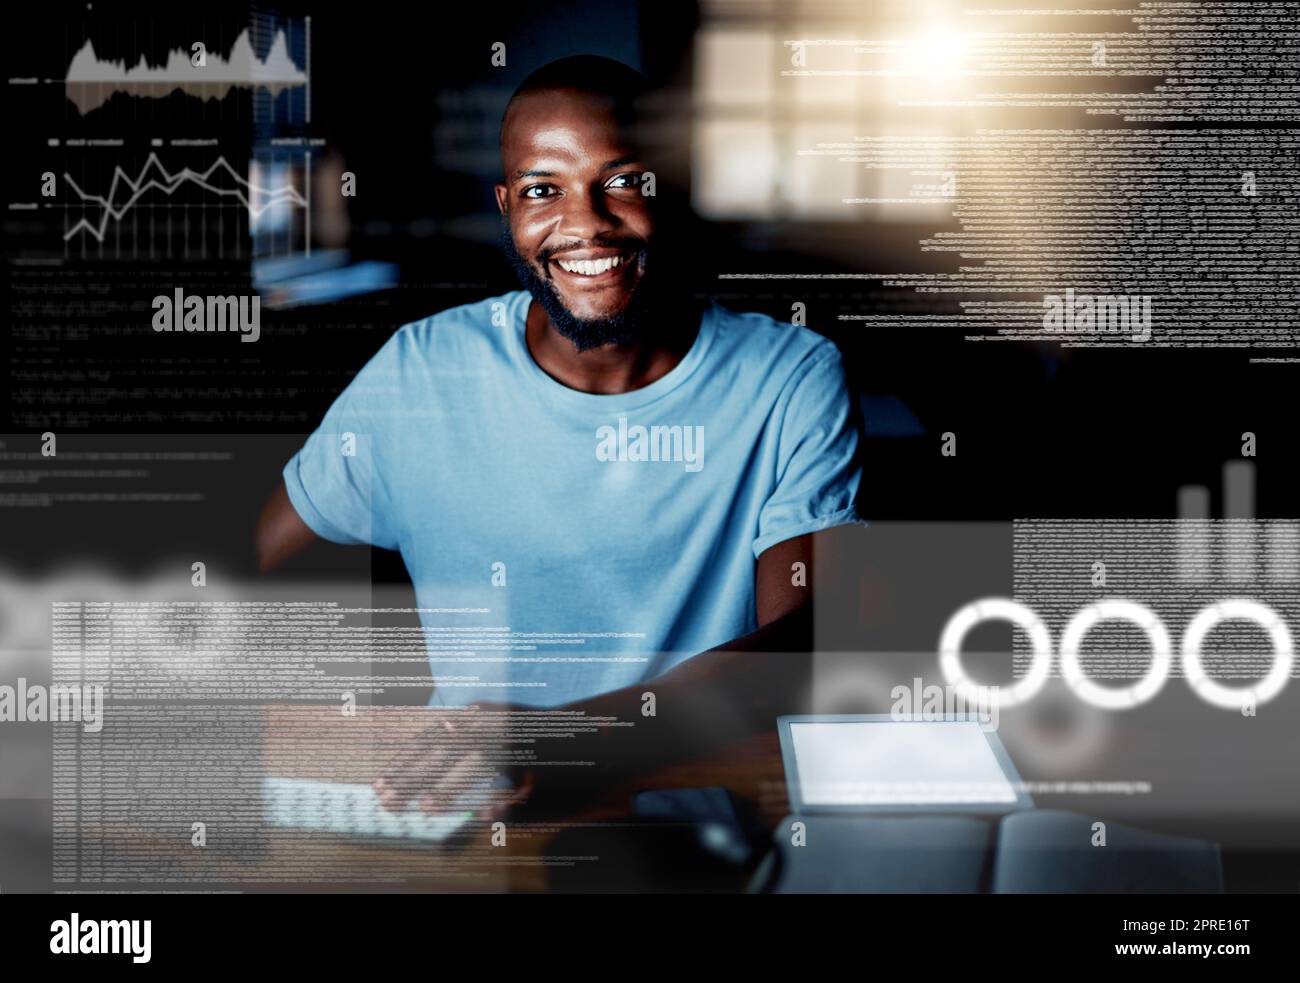 Computer programming, coding and web design with a creative professional in his office with CGI, special effects and digital overlay. Portrait of a programmer developing code and language on a pc Stock Photo